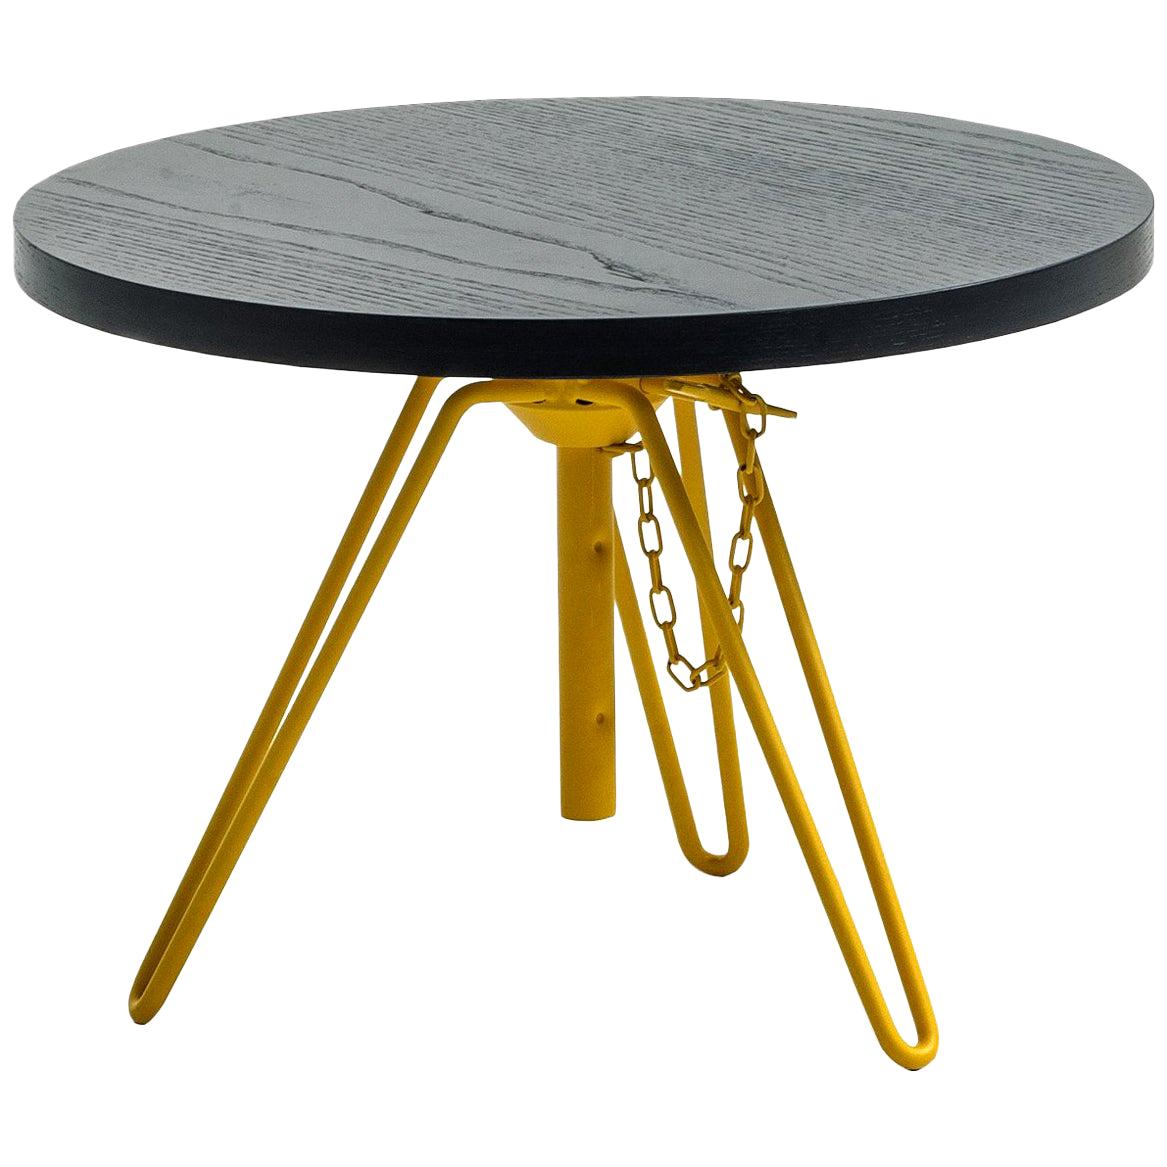 "Overdyed" Aniline Dyed Ash Veneered Top & Steel Side Table by Moroso for Diesel For Sale